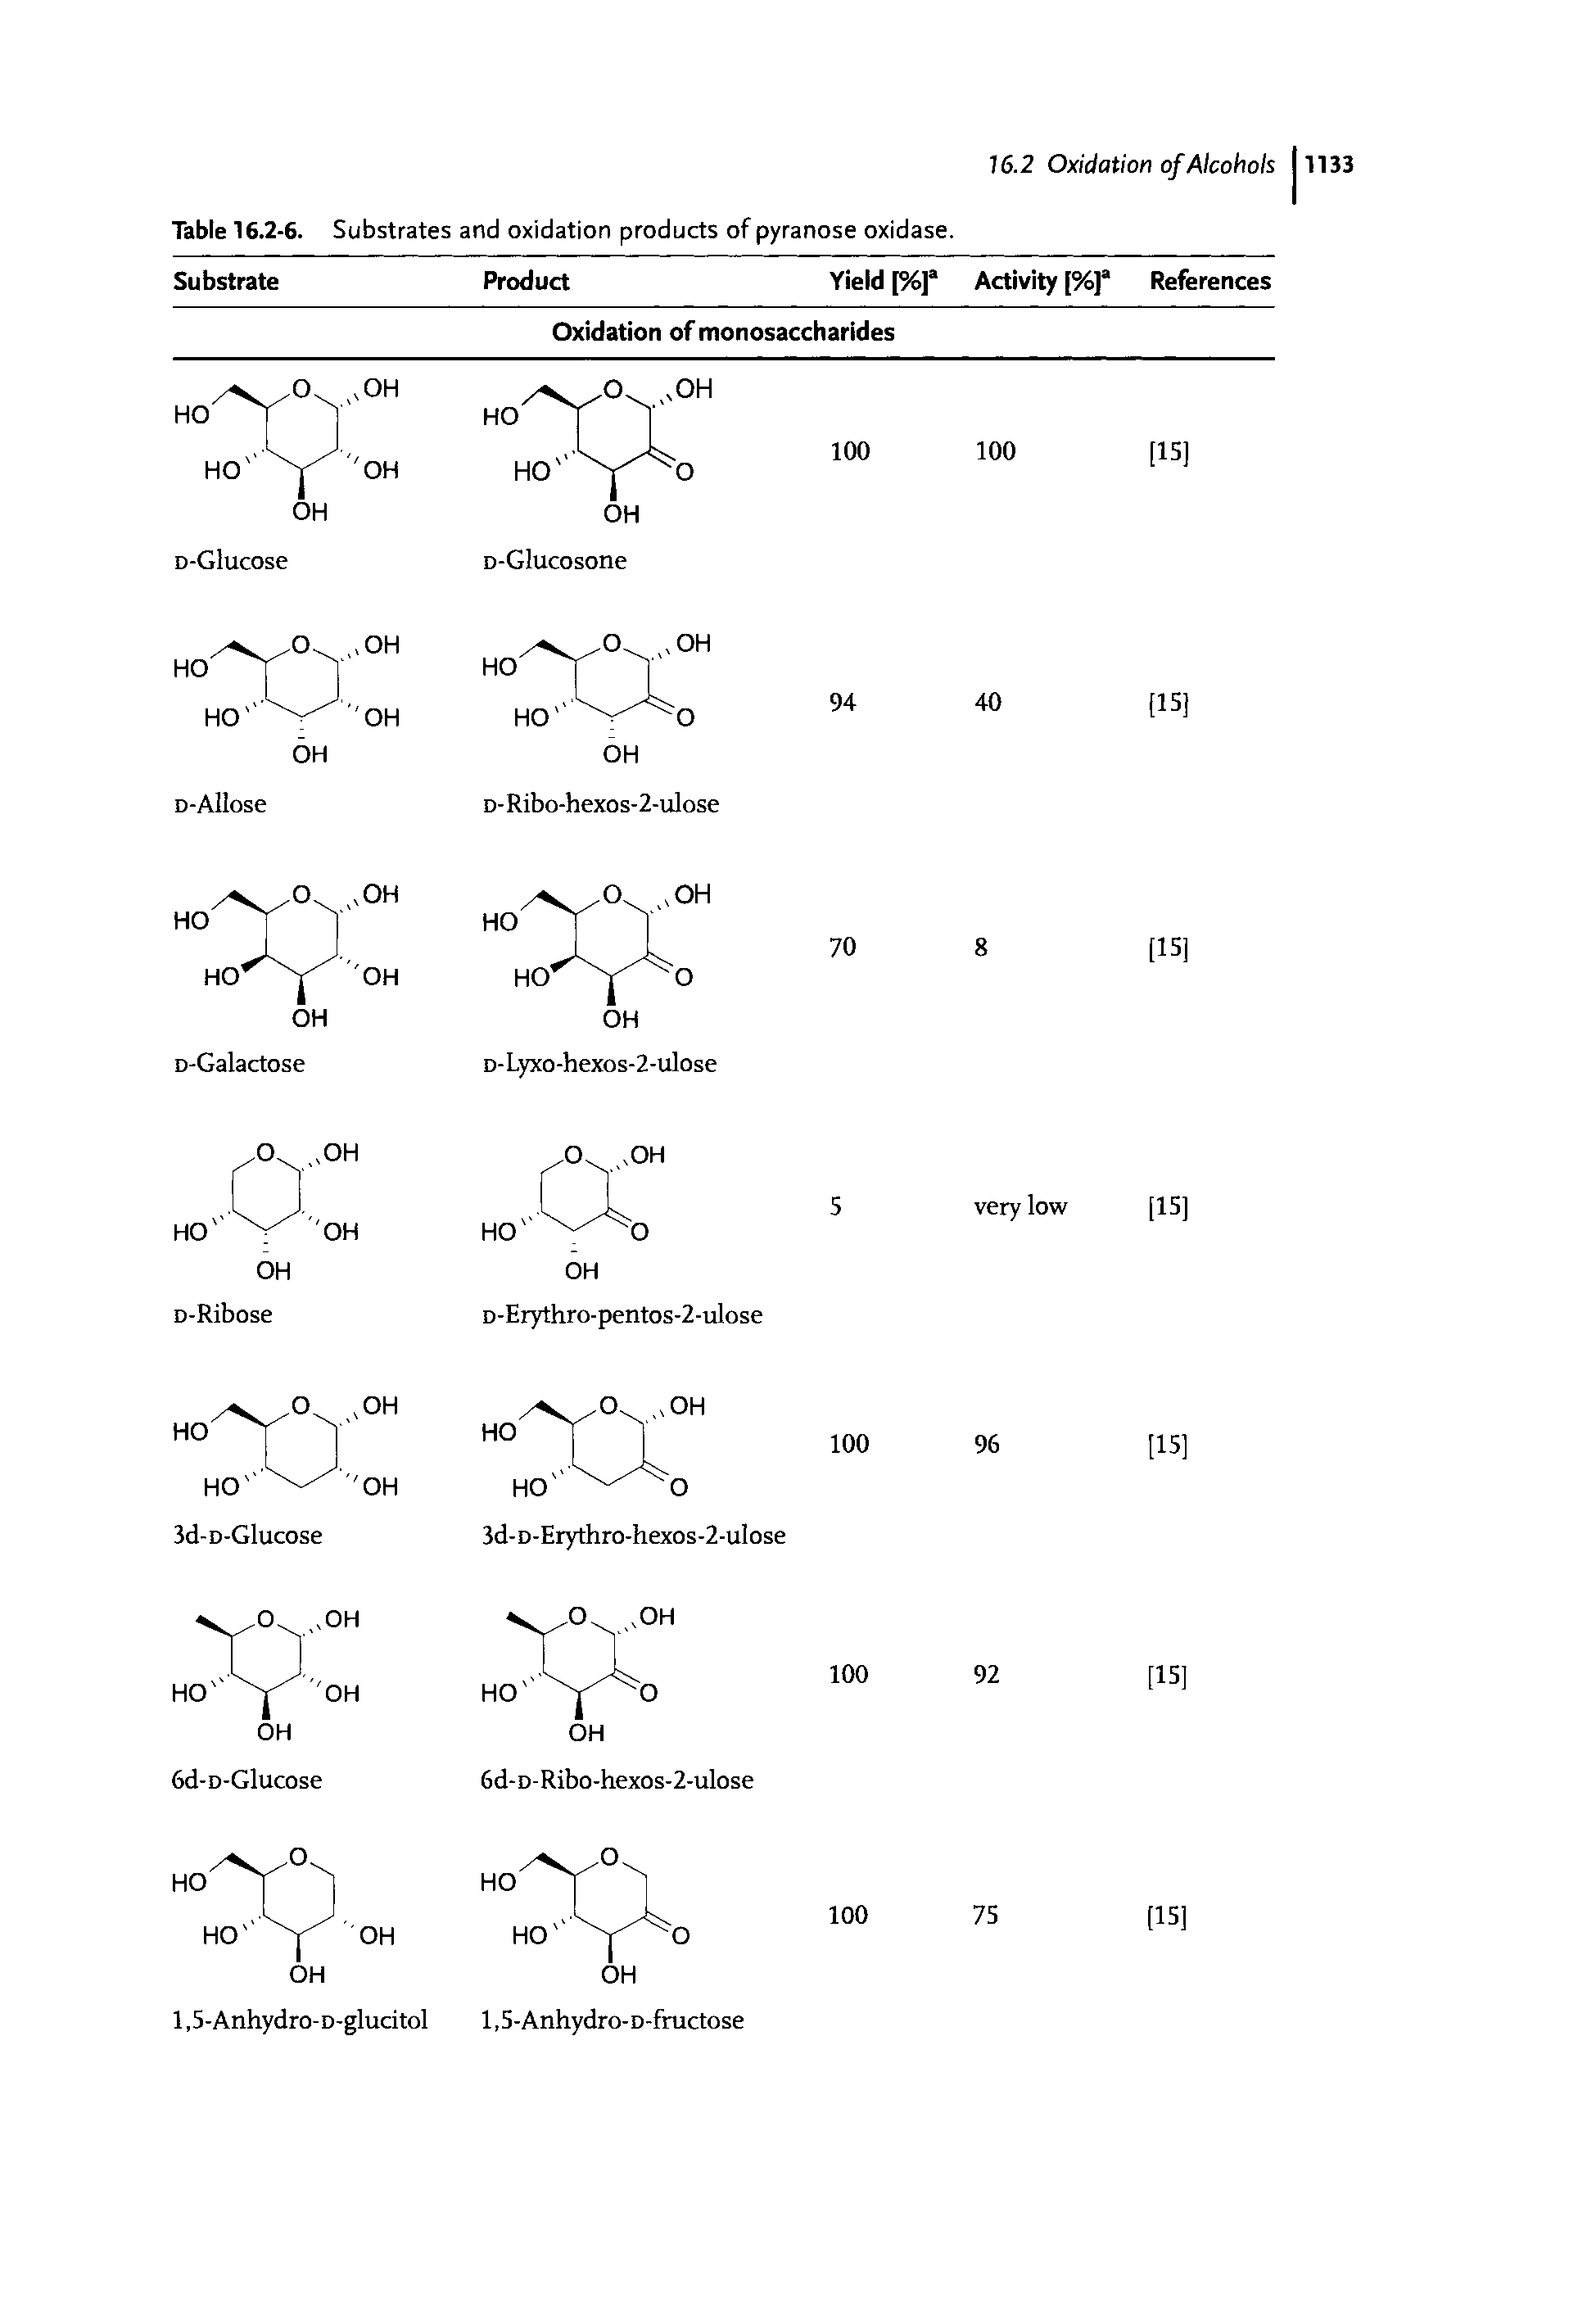 Table 16.2-6. Substrates and oxidation products of pyranose oxidase.